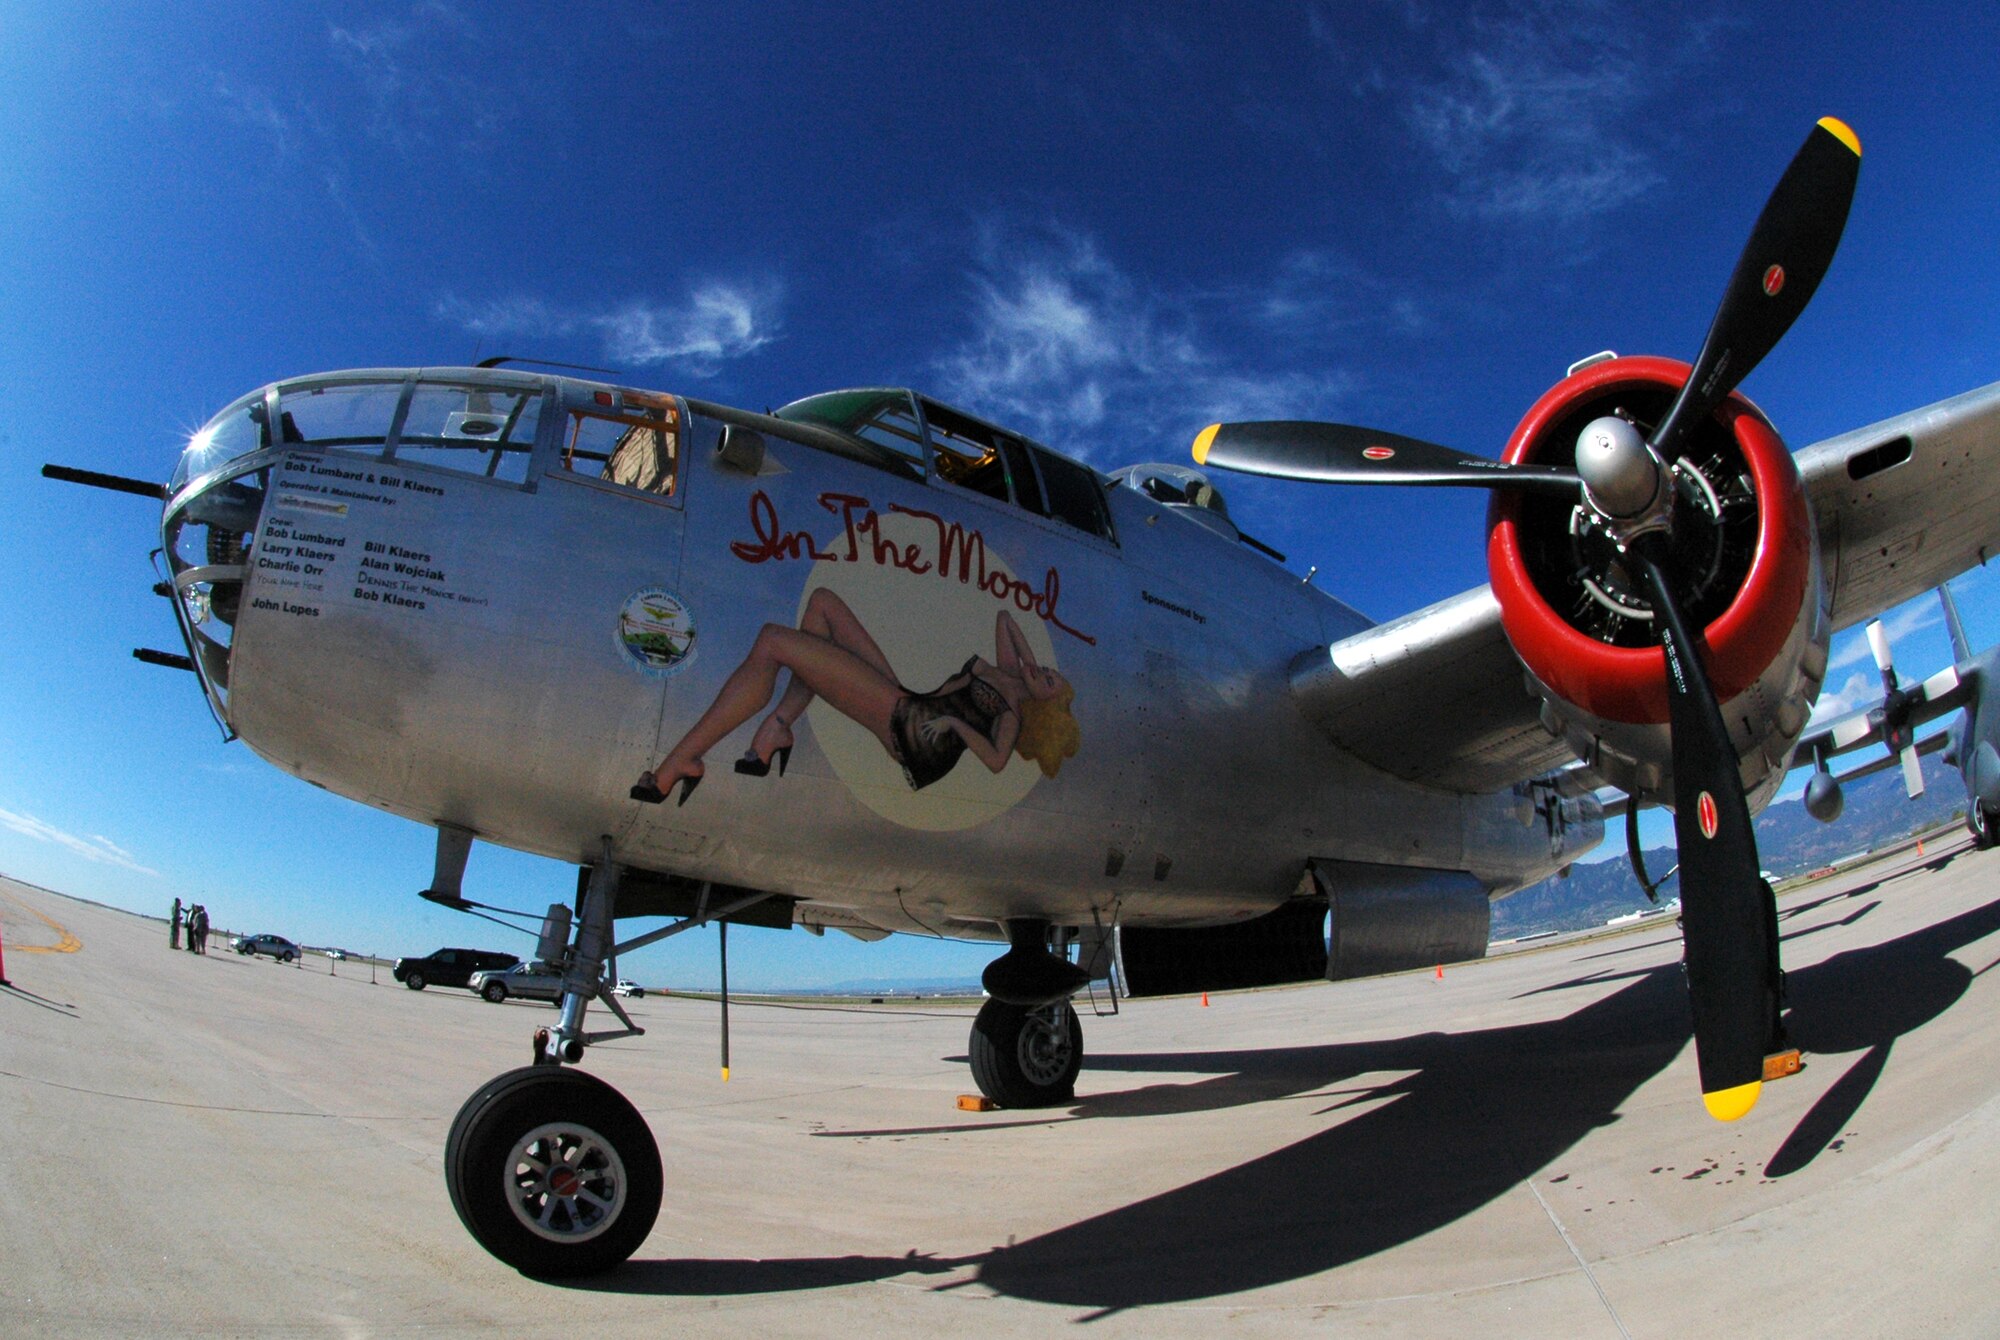 A World War II-era B-25 Mitchell medium bomber, named "In The Mood," stands ready more than 60 years later for a static display aircraft mission May 19 at Peterson Air Force Base, Colo. The bomber was parked next to a 302nd Airlift Wing C-130 Hercules (right) and was joined by a P-47 Thunderbolt, an F-15C Eagle, a Colorado Air National Guard F-16 Fighting Falcon and a Canadian CF-18 Hornet as part of a change of command ceremony for the North American Aerospace Defense Command and U.S. Northern Command organizations. The 302nd Airlift Wing is an Air Force Reserve Command-assigned unit. (U.S. Air Force photo/Staff Sgt. Stephen J. Collier)